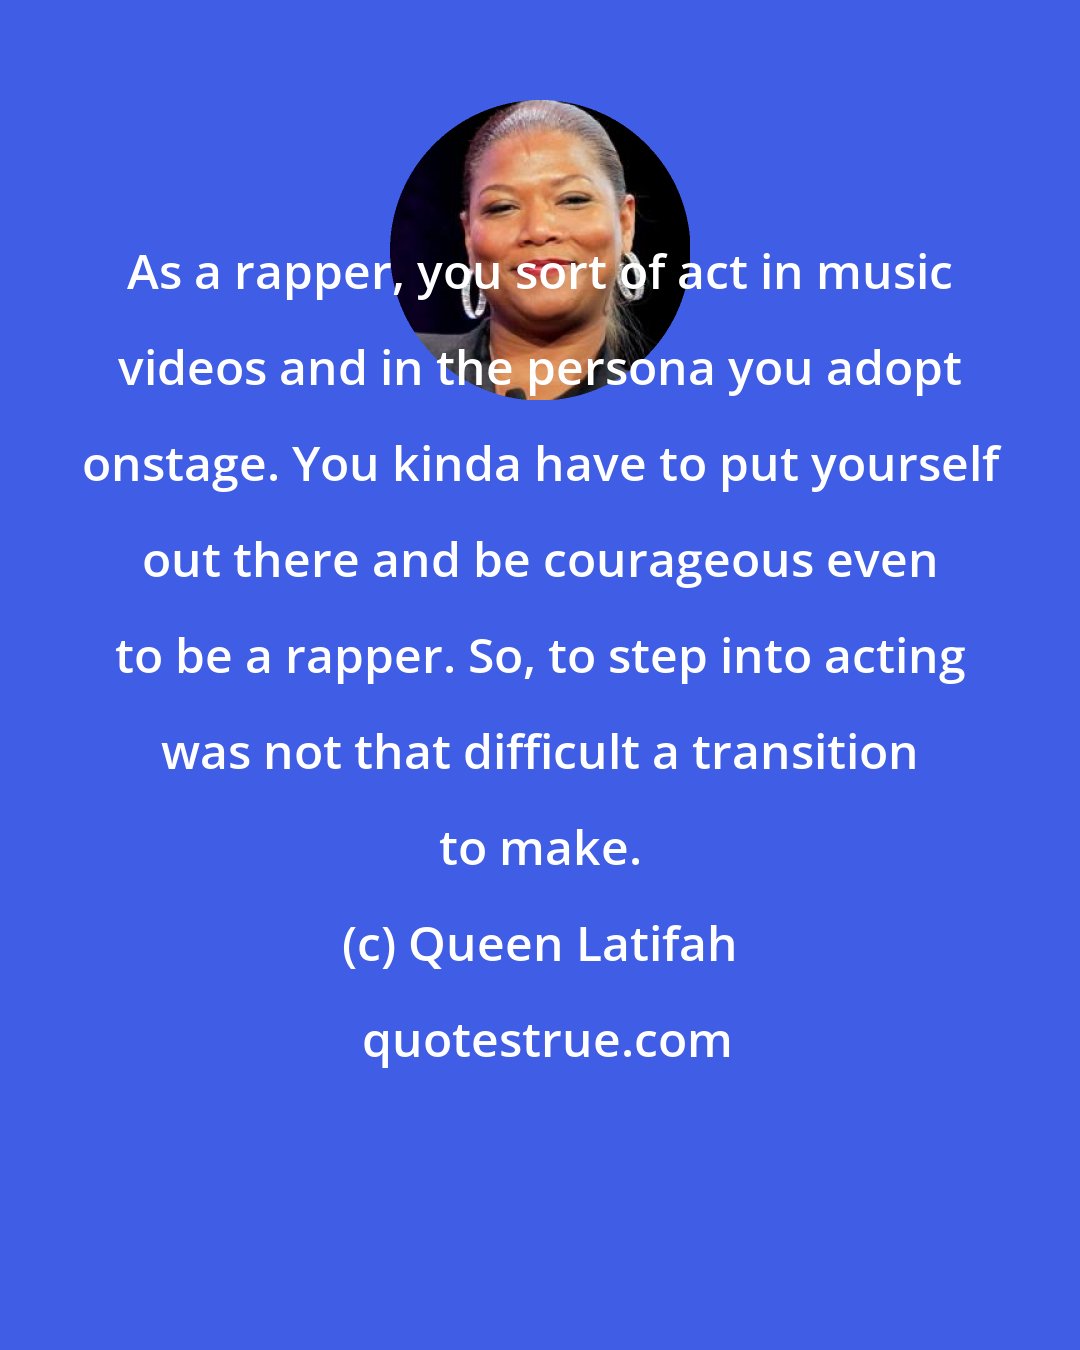 Queen Latifah: As a rapper, you sort of act in music videos and in the persona you adopt onstage. You kinda have to put yourself out there and be courageous even to be a rapper. So, to step into acting was not that difficult a transition to make.